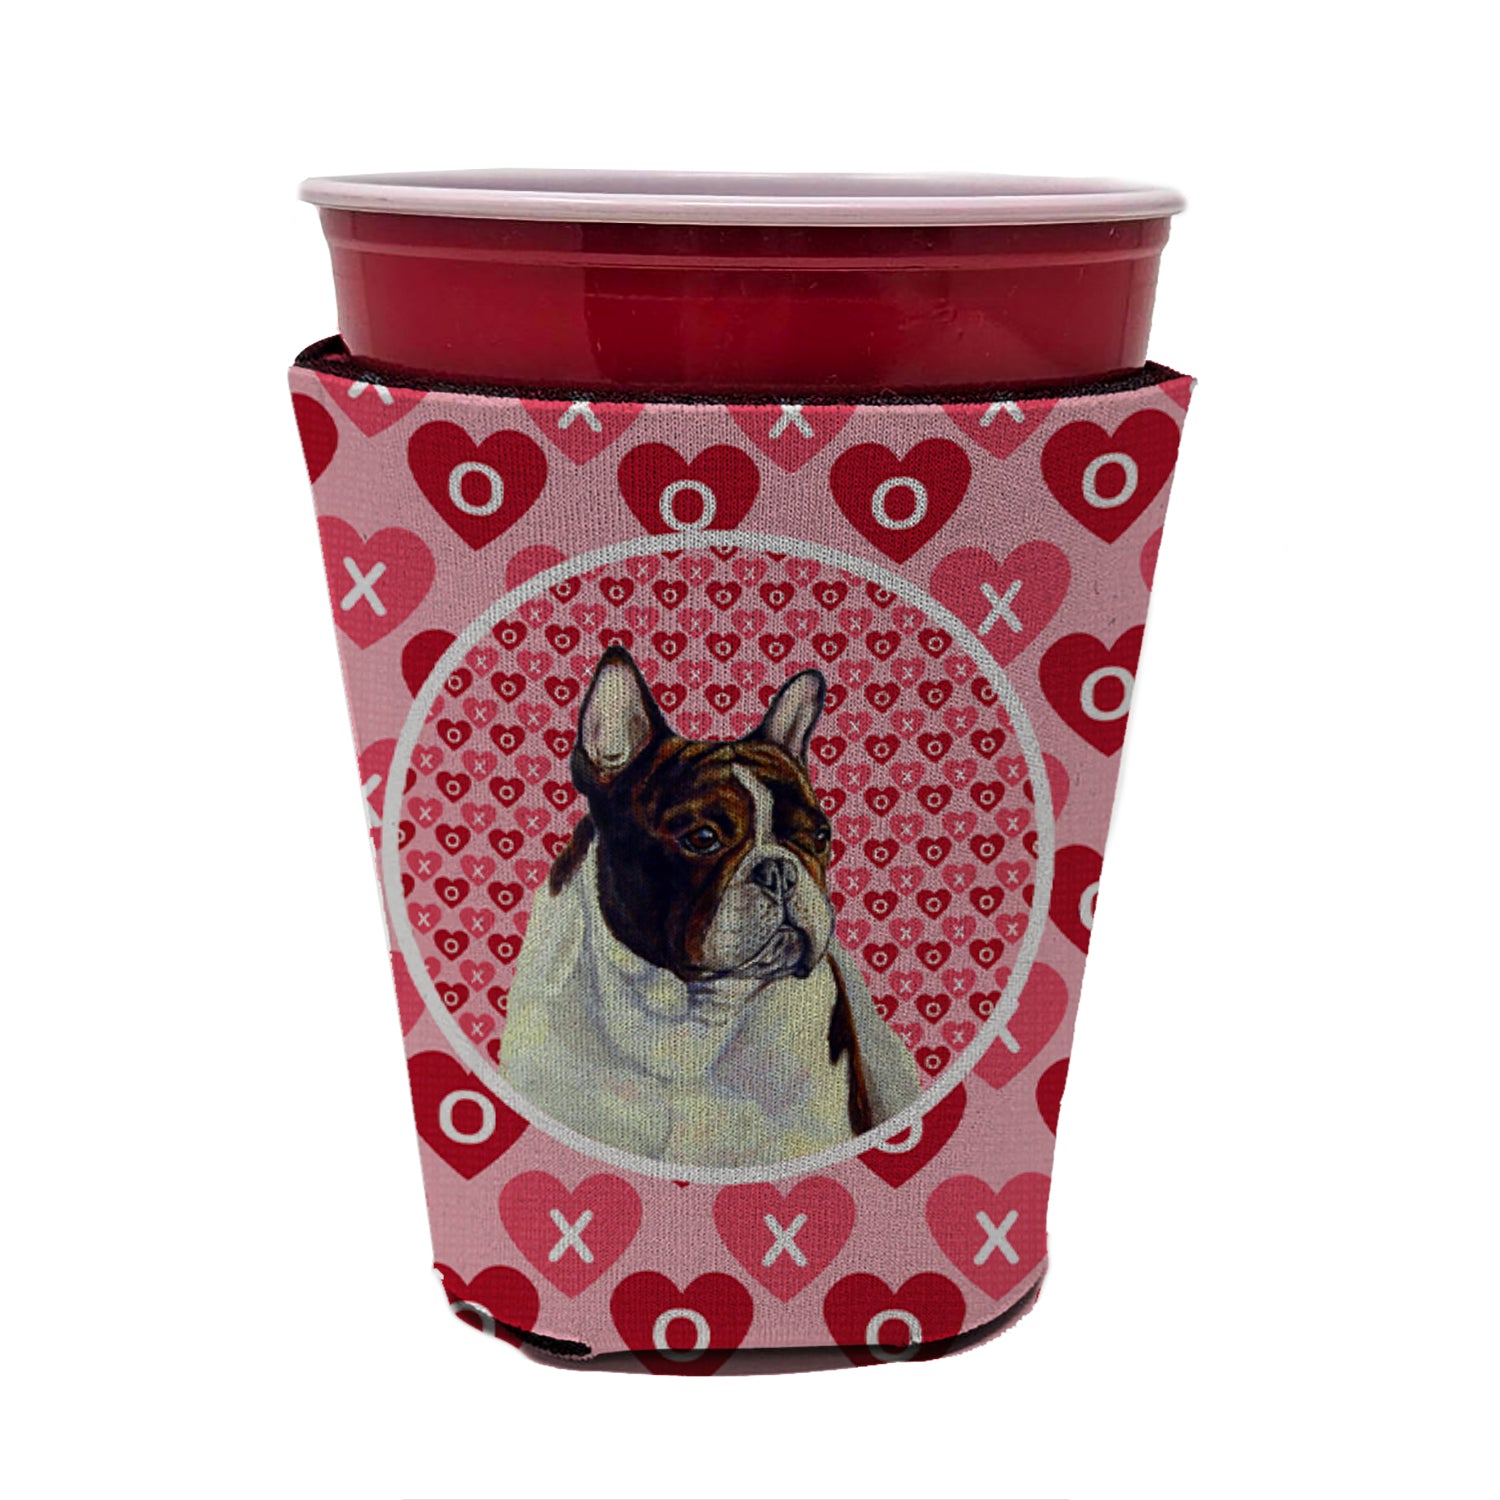 Bouledogue Français Valentine's Love and Hearts Red Solo Cup Beverage Insulator Hugger